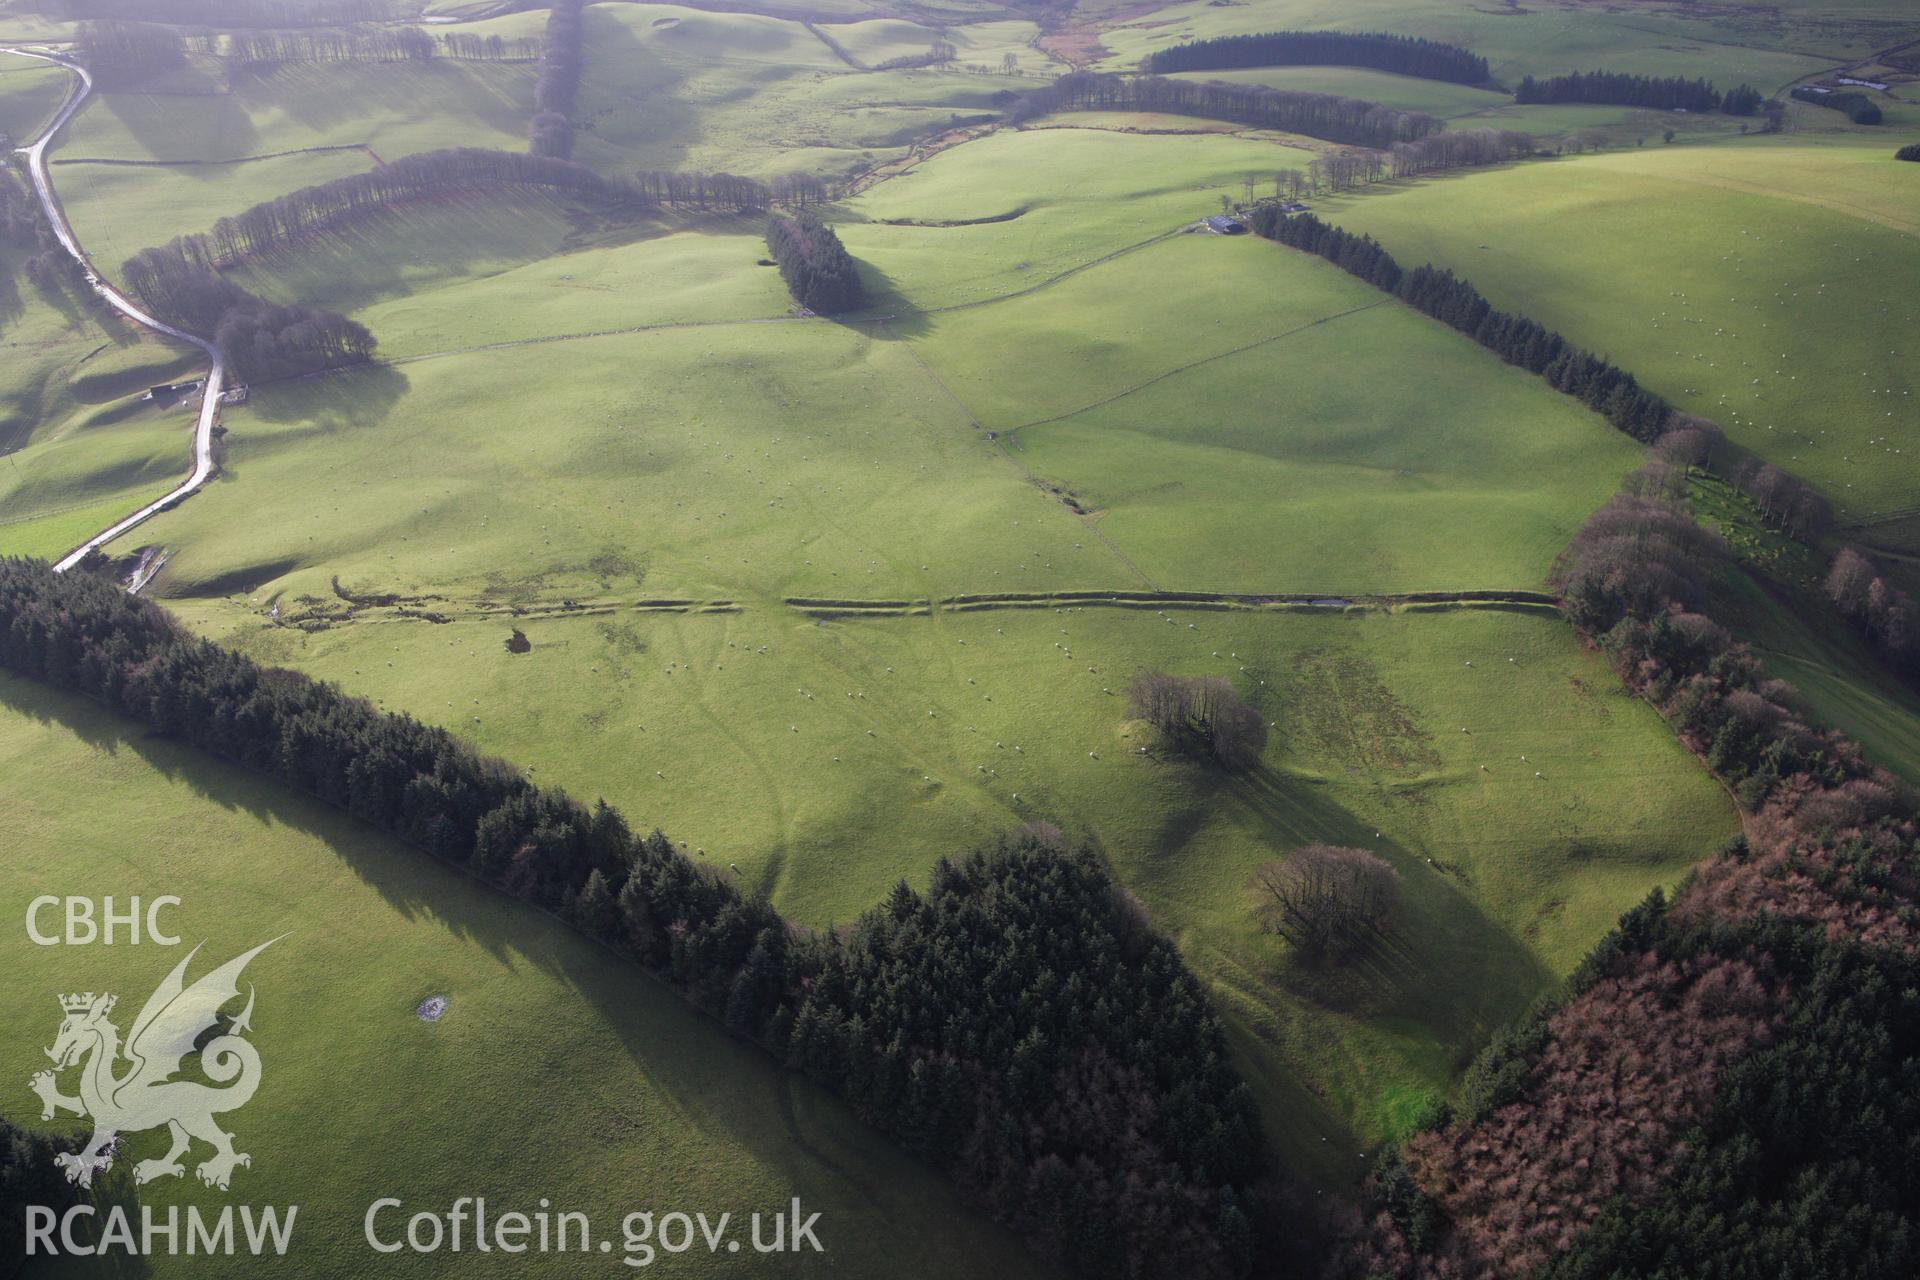 RCAHMW colour oblique aerial photograph of Crugyn Bank Dyke. Taken on 10 December 2009 by Toby Driver